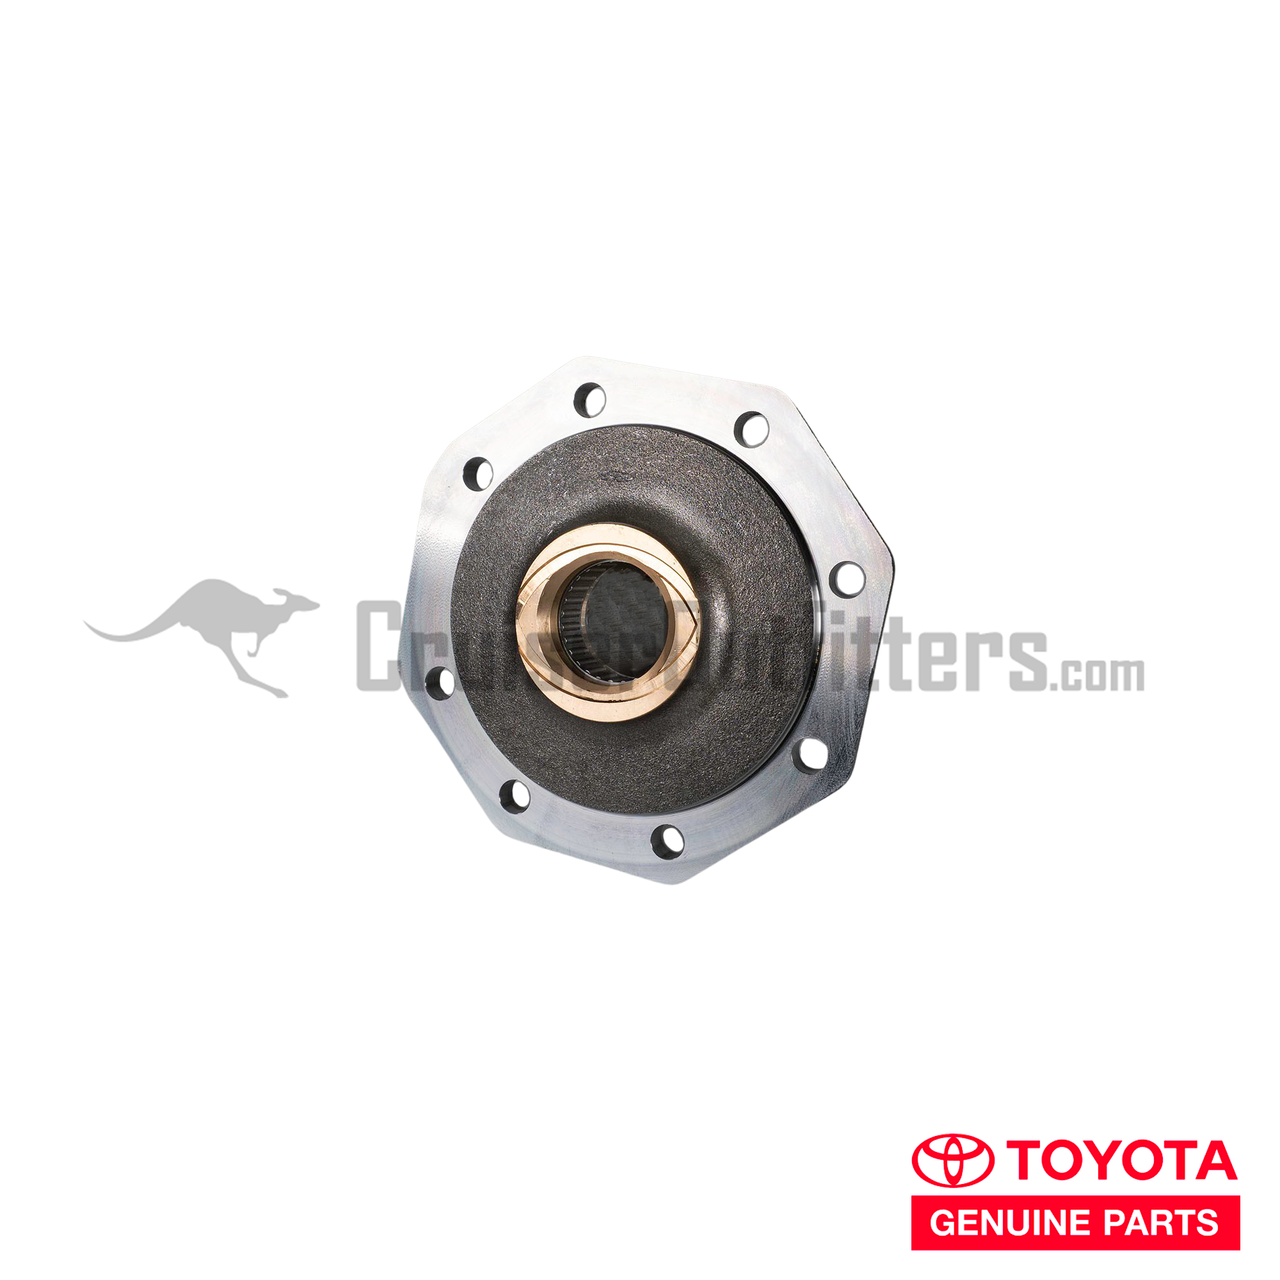 Front Axle Spindle With Bushing & Bearing - Fits 8x/450/105 Series (FA60081OEM)